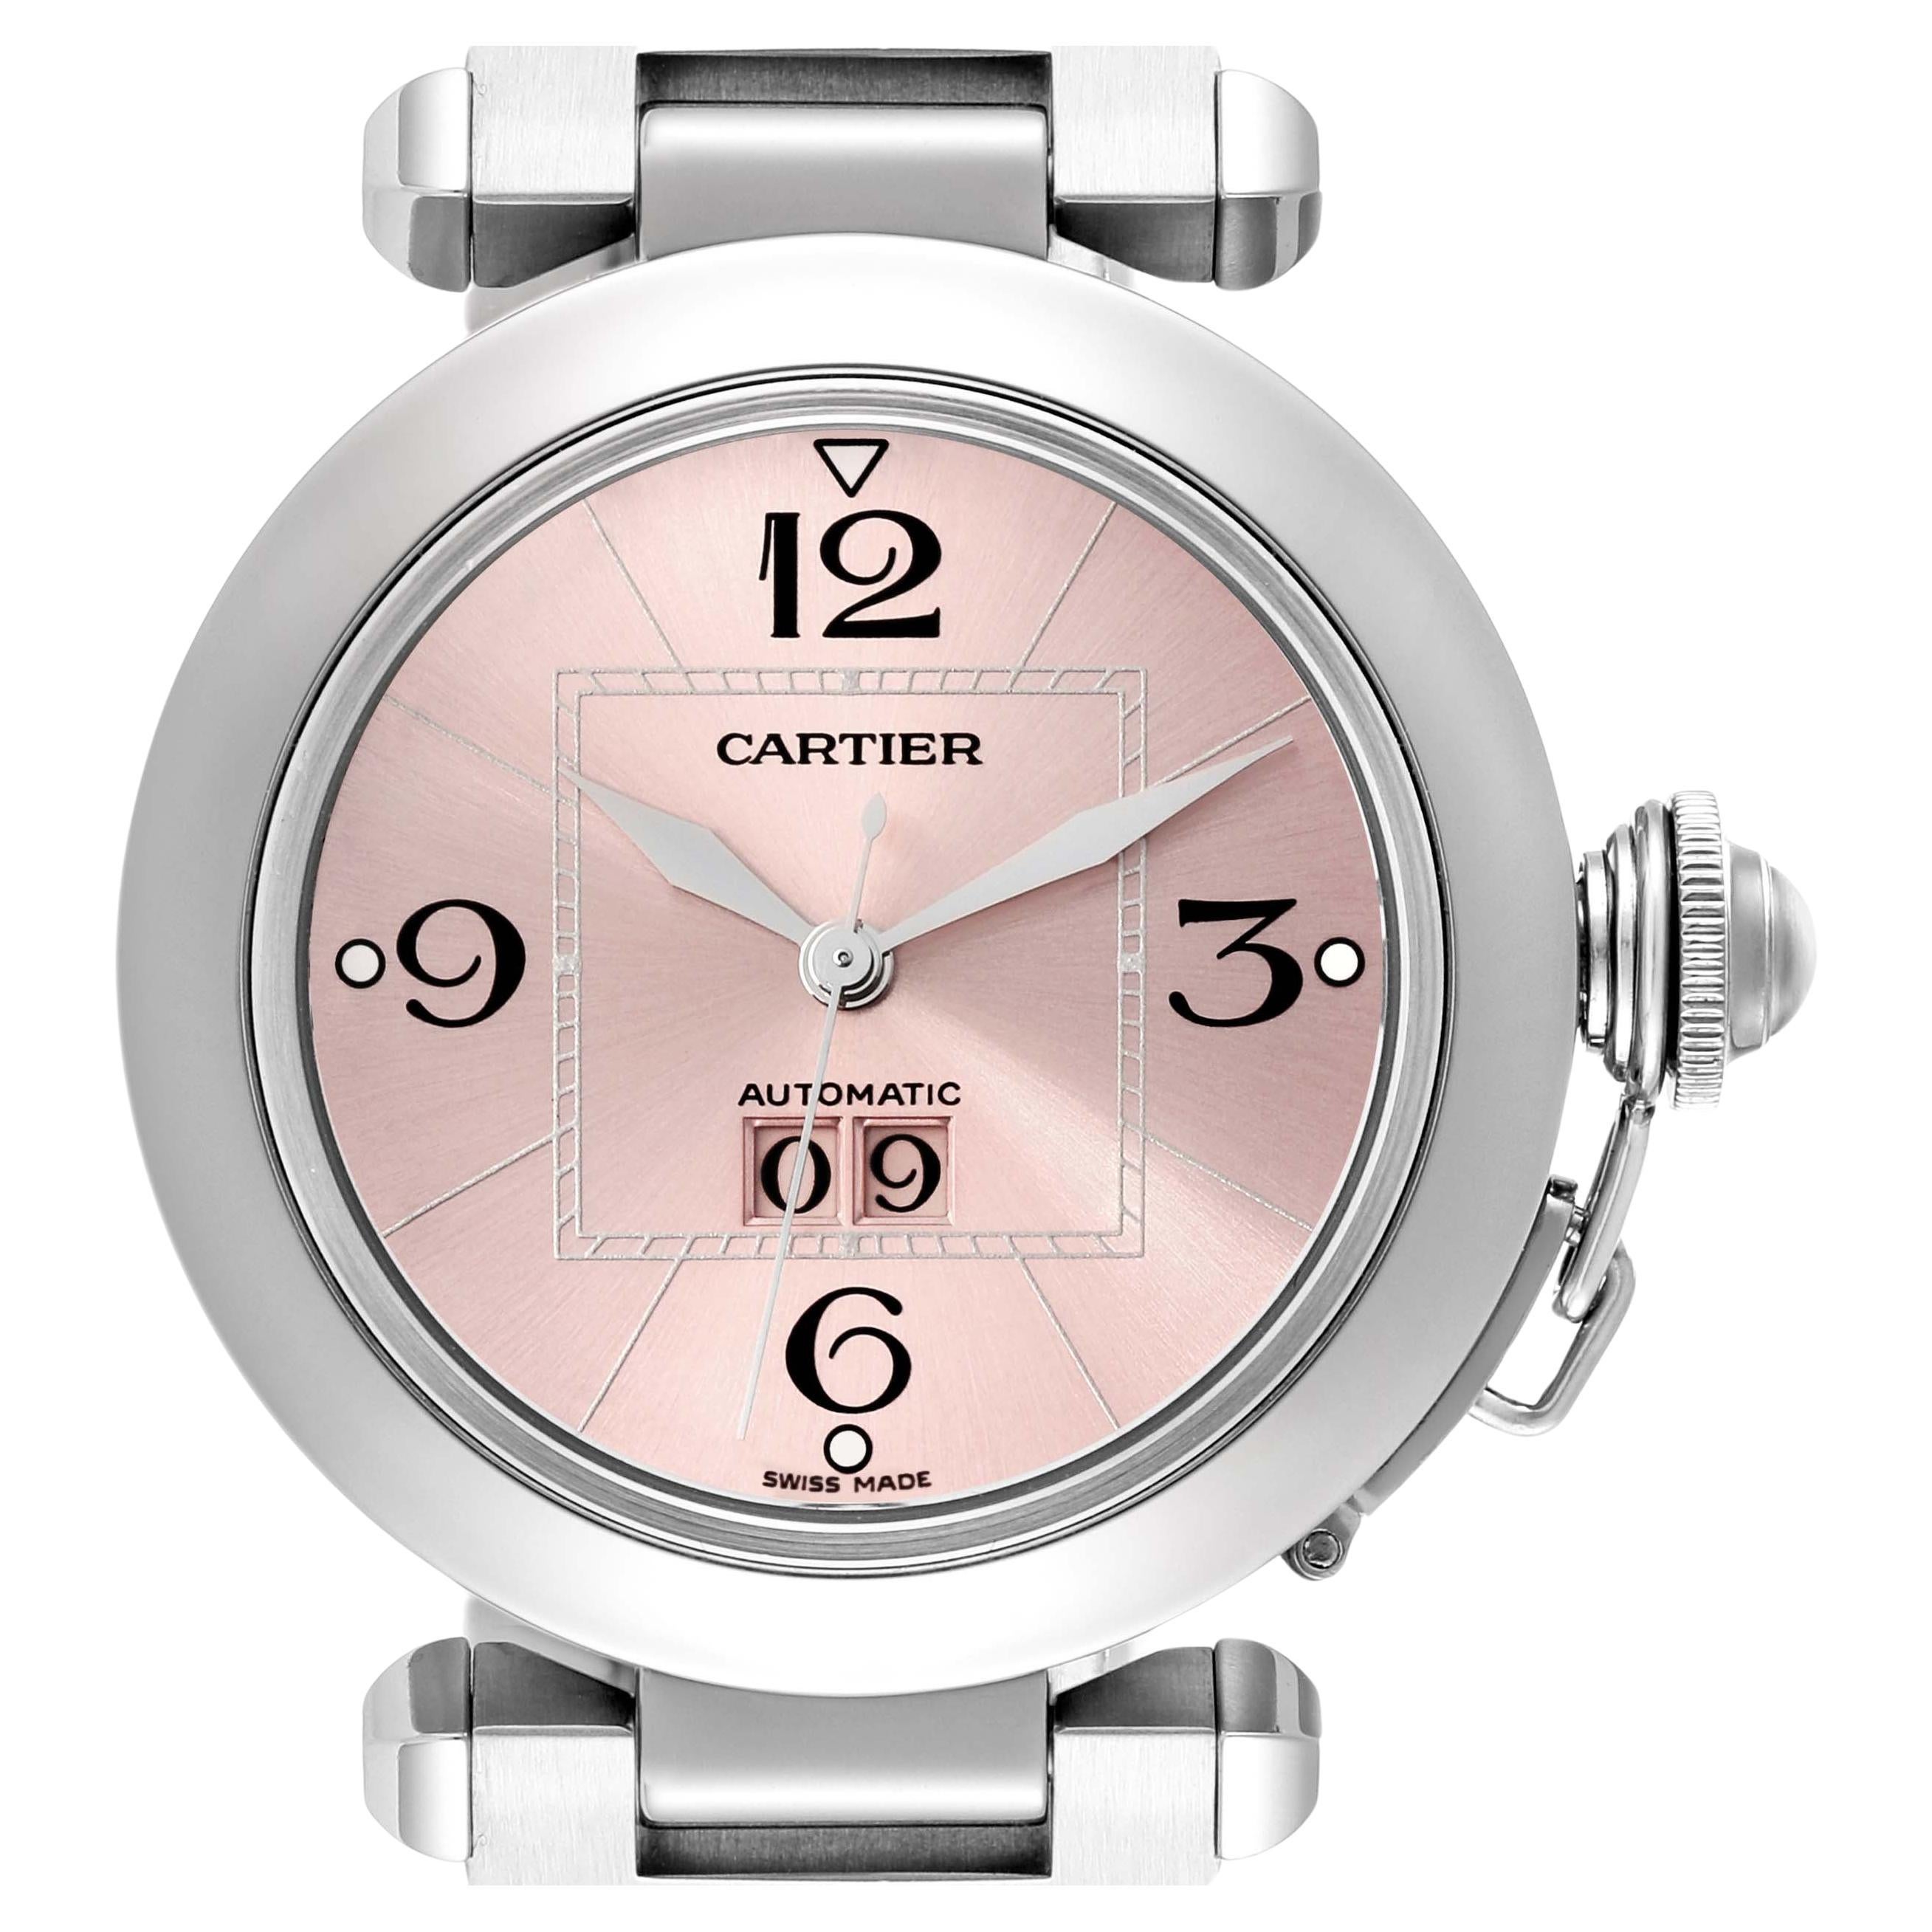 Cartier Pasha Big Date Pink Dial Steel Ladies Watch W31058M7 Box Papers